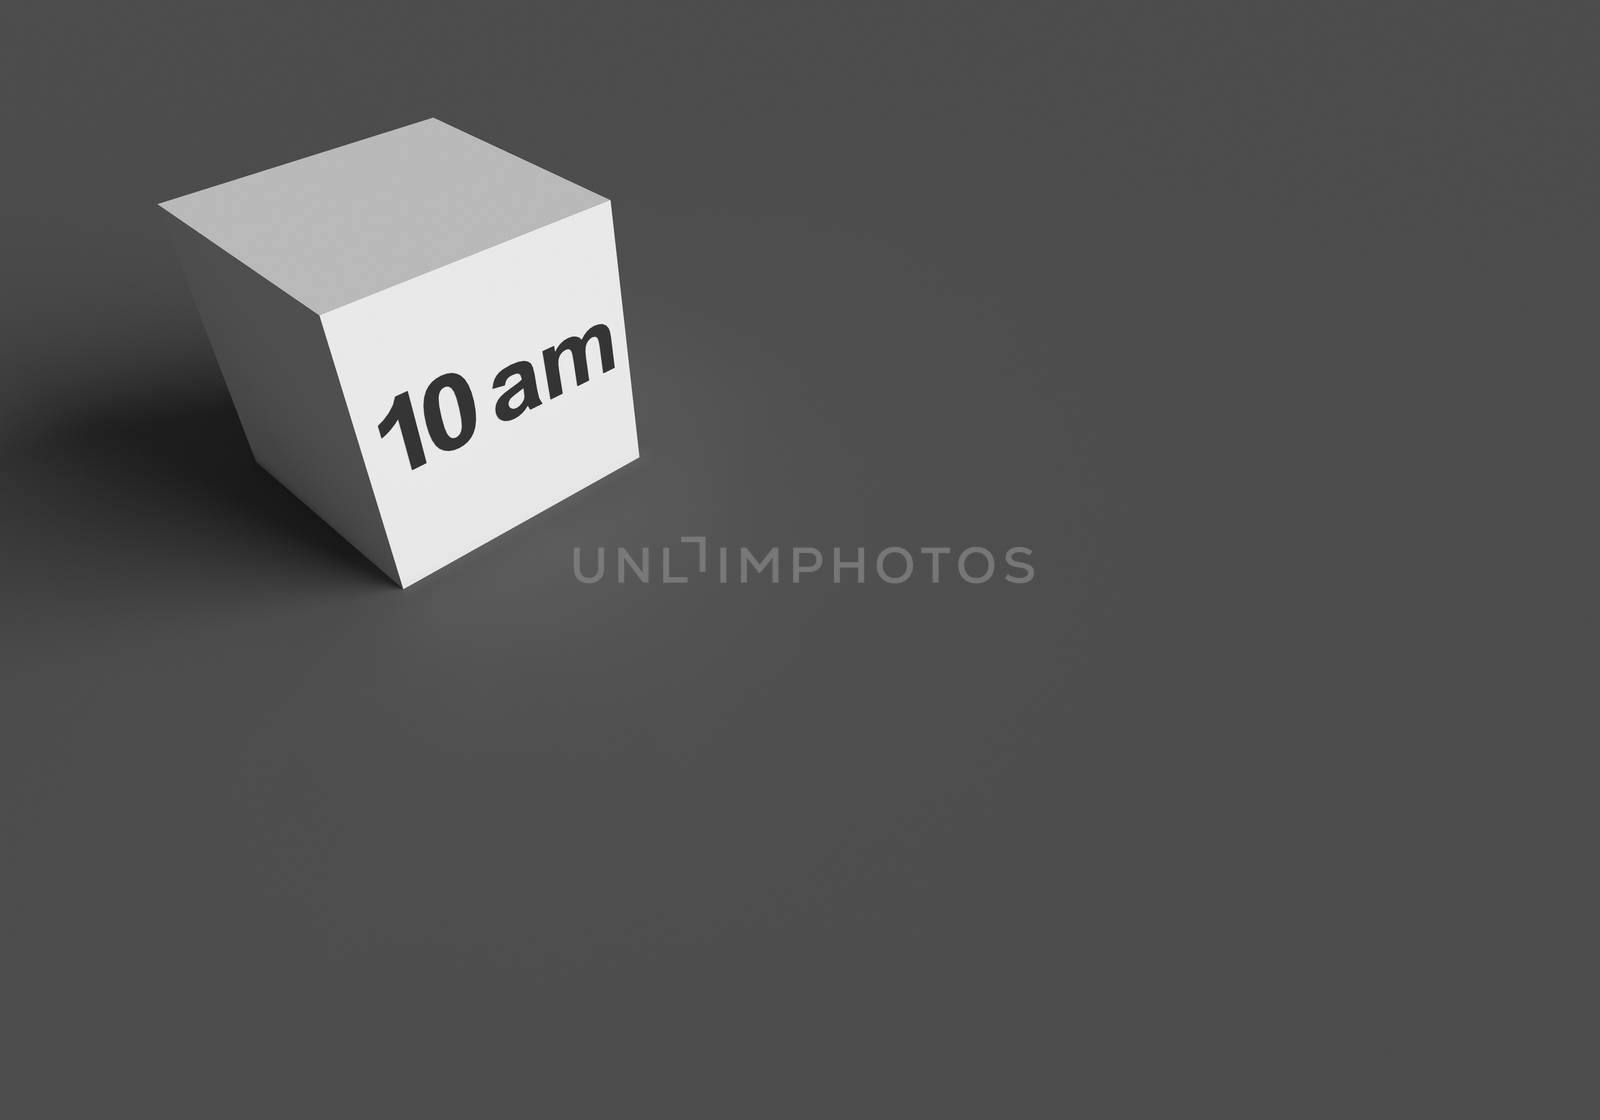 3D RENDERING WORDS 10 am ON WHITE CUBE, STOCK PHOTO